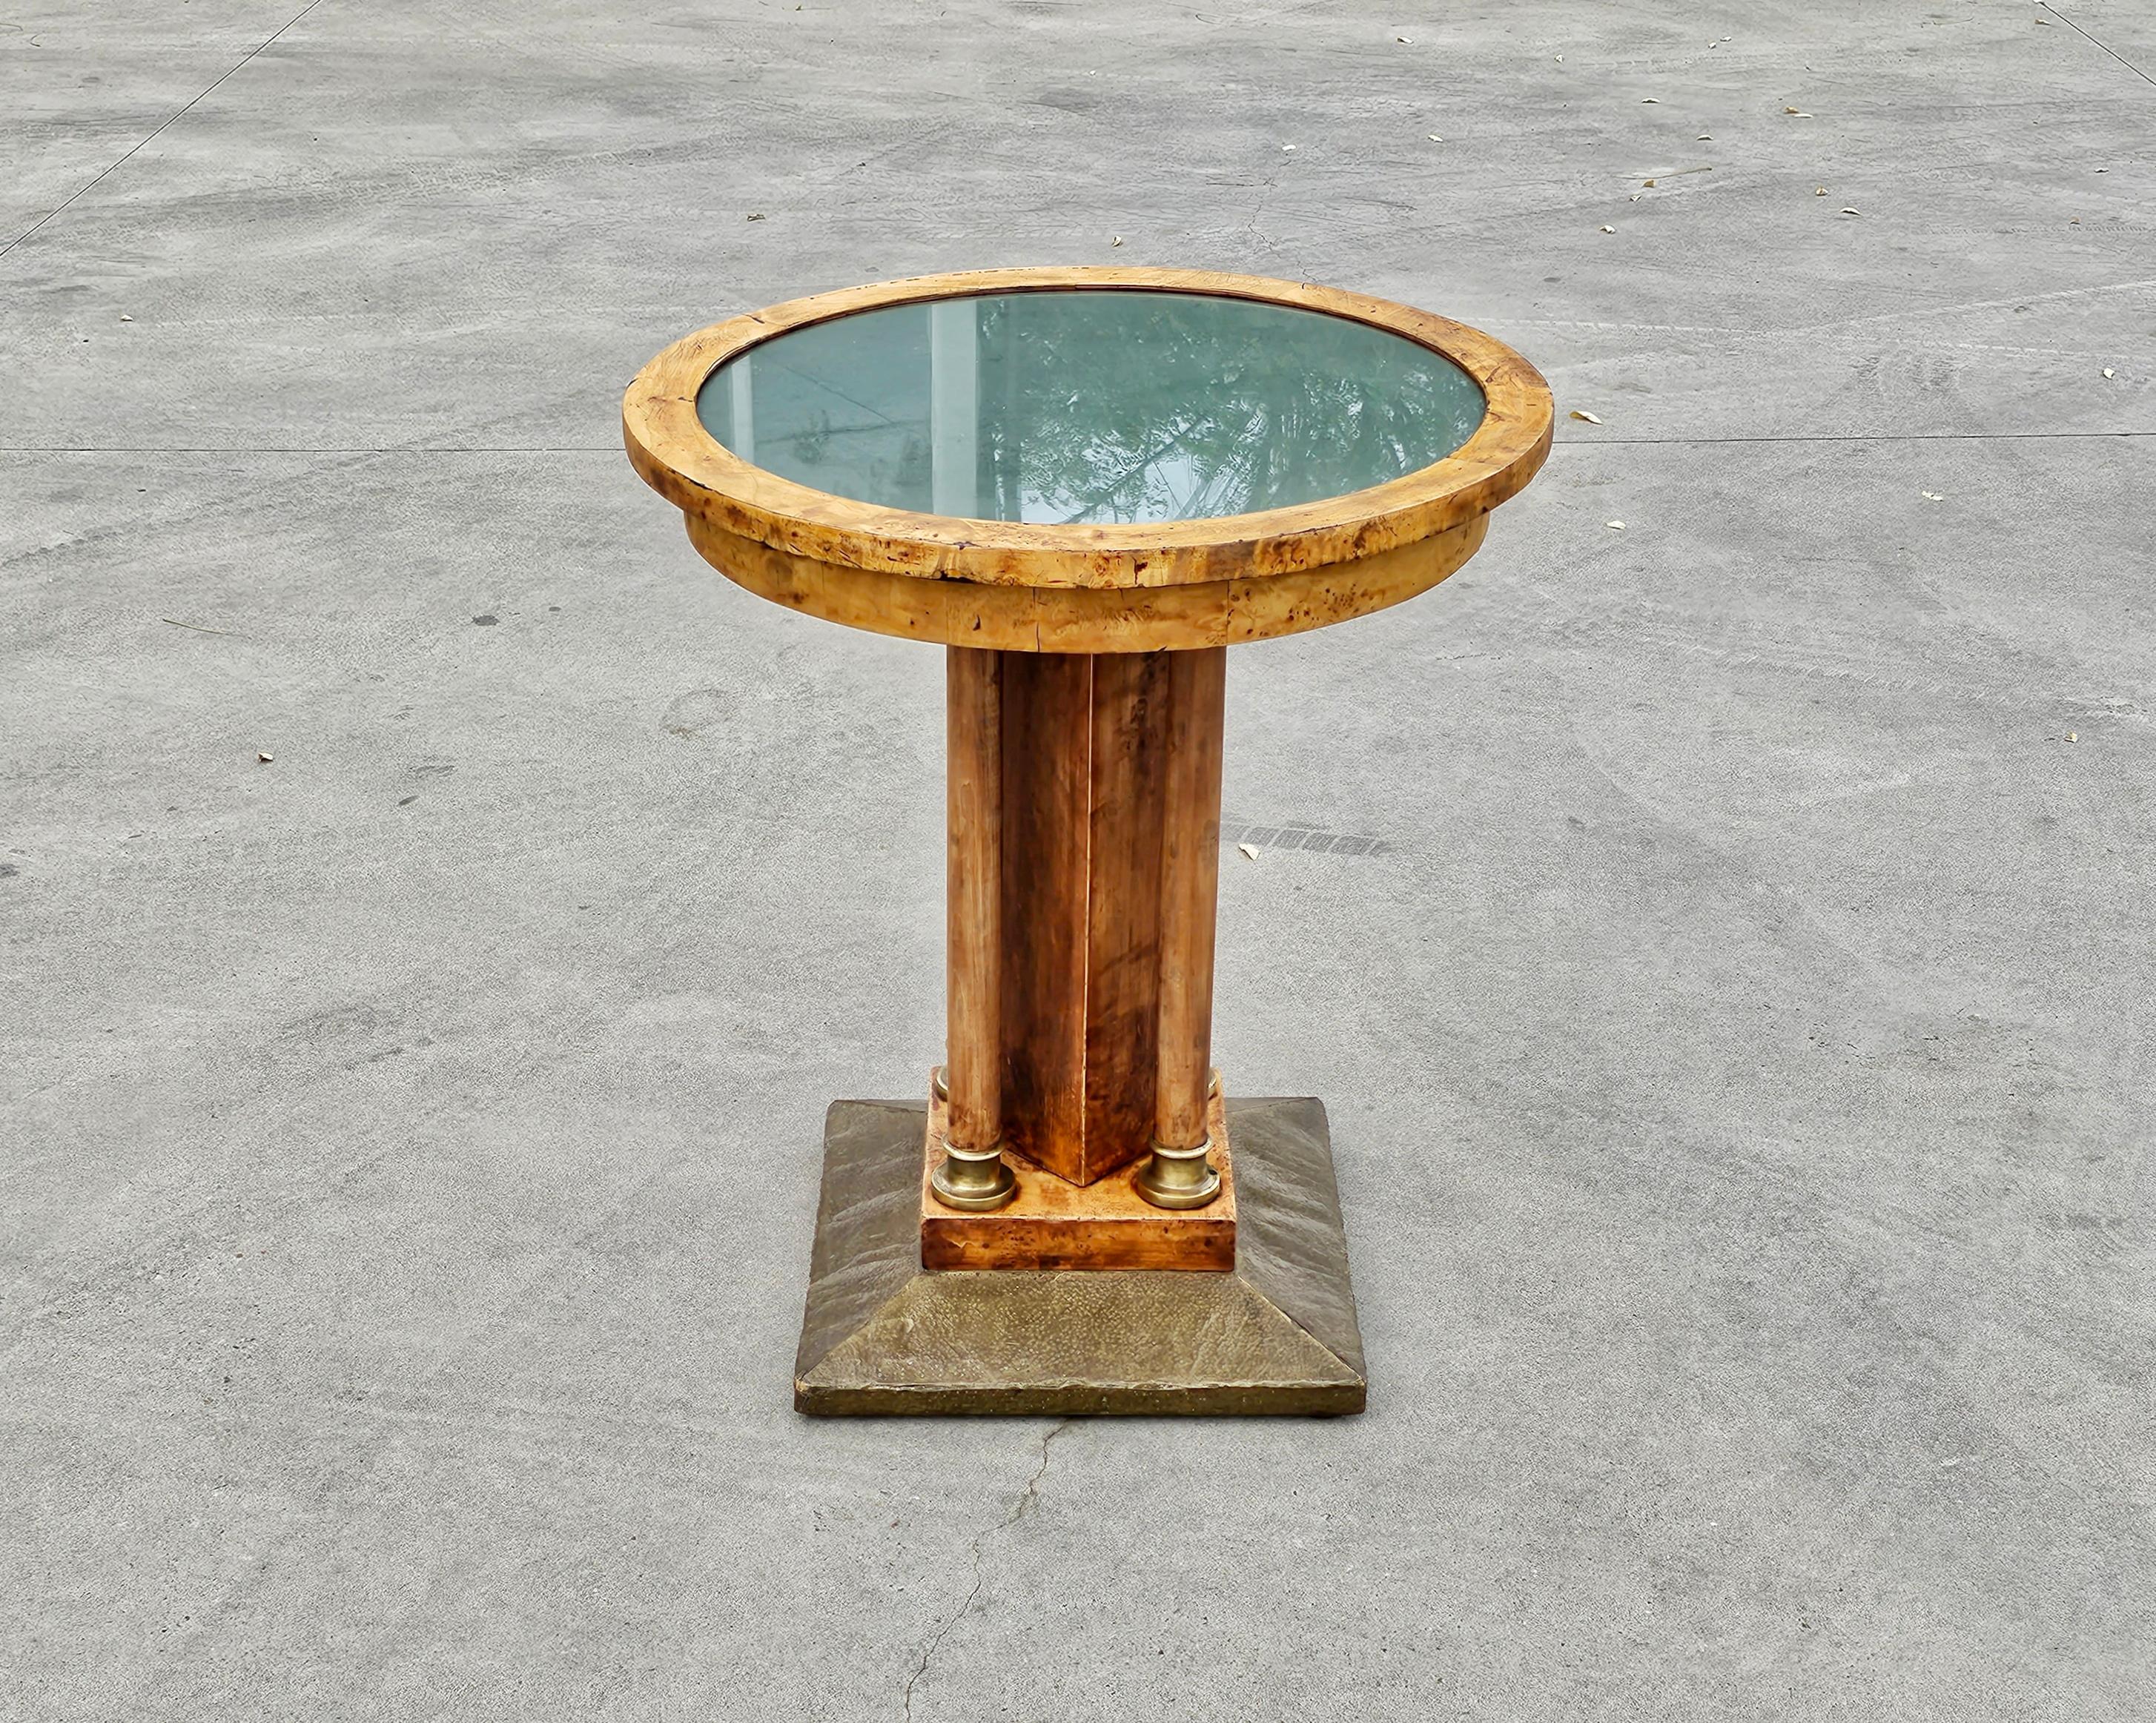 In this listing you will find an antique Viennese Secessionist Gueridon table or Pedestal Side Table done in Birdseye maple, with decorative elements done in brass. Table is the standard height for a dining table, so it could be used for various